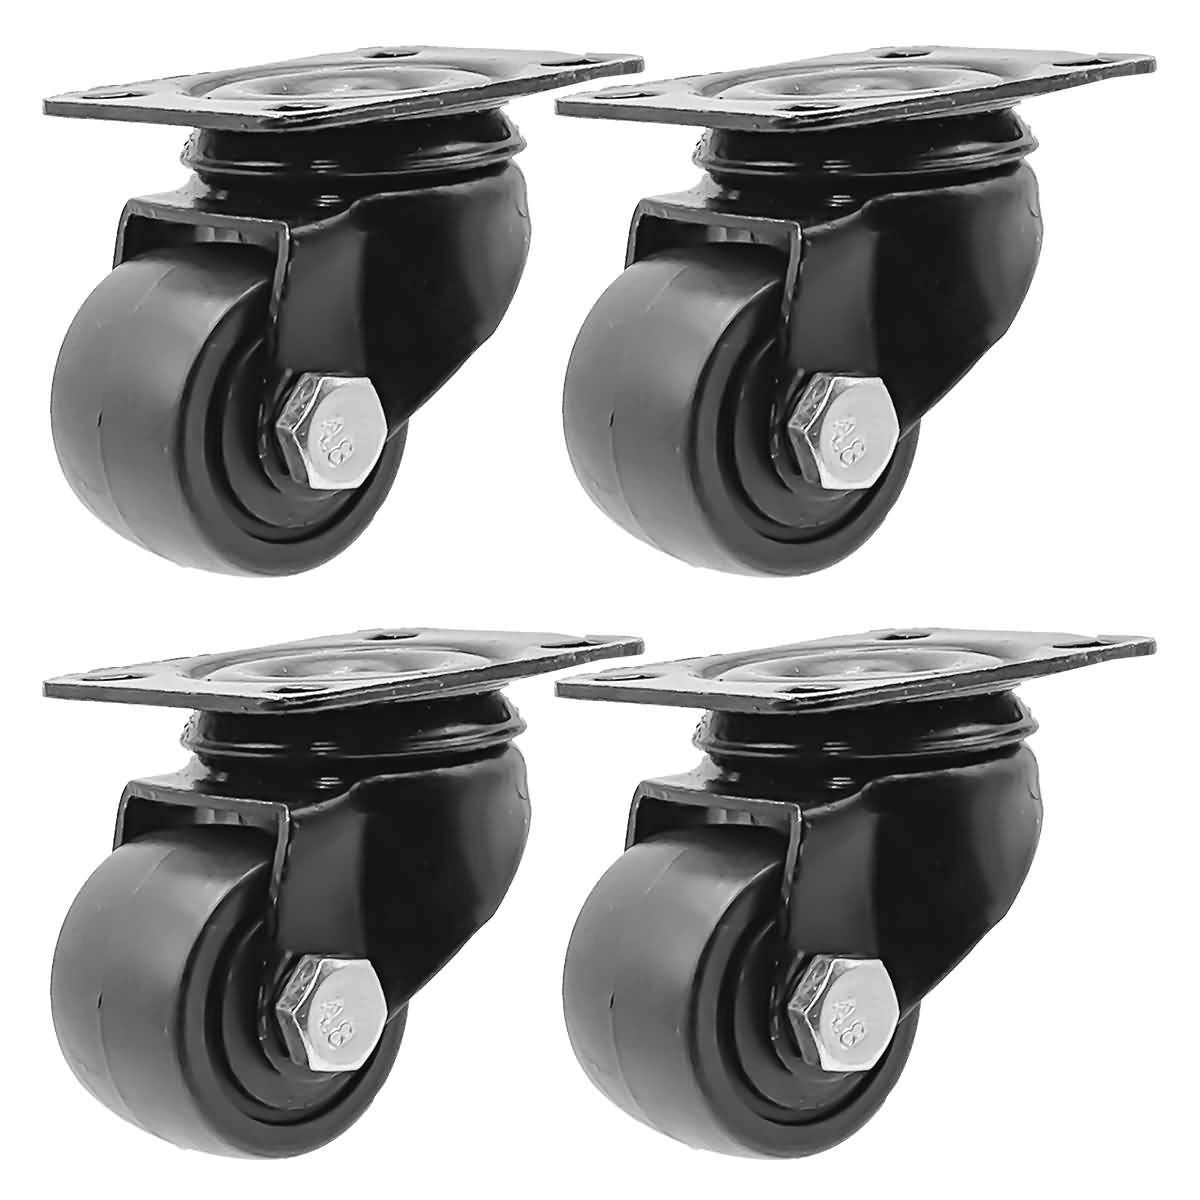 FactorDuty 2 inch Heavy Duty Polyurethane Caster Wheels Rigid Fixed Non Swivel Industrial Grade Solid Low Profile Smooth and Silent 1000LB Capacity Pack of 4